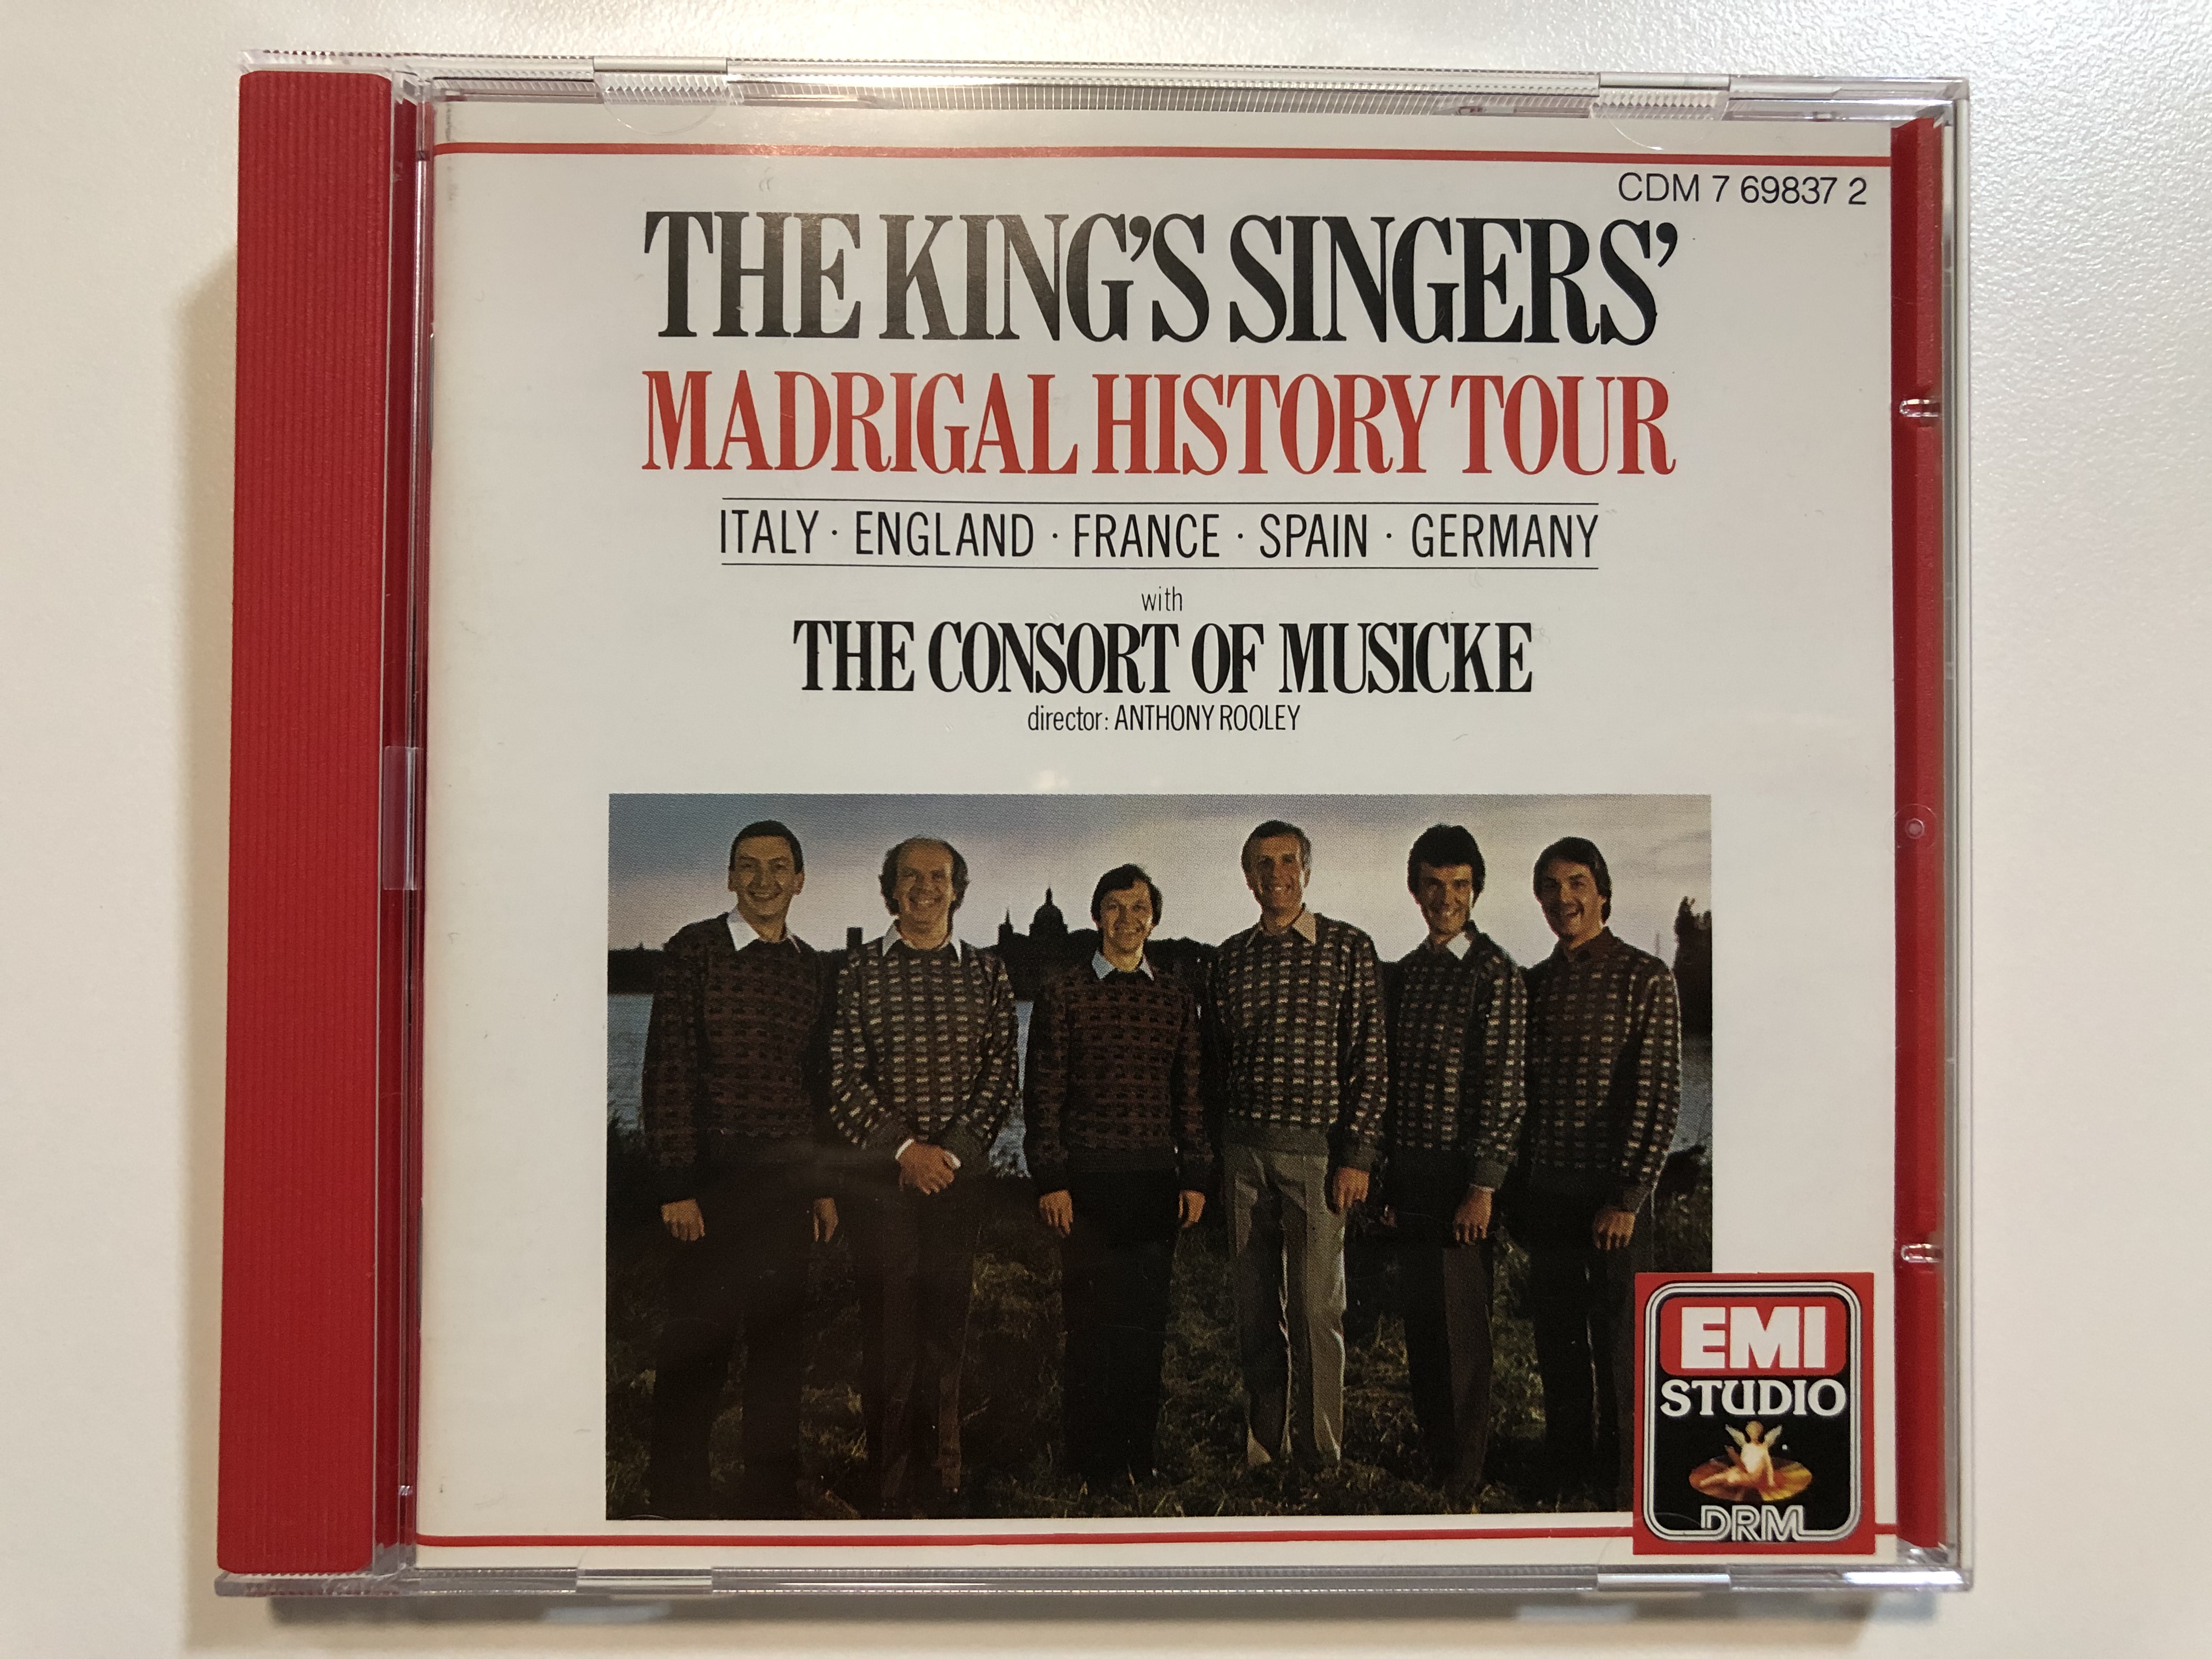 the-king-s-singers-madrigal-history-tour-italy-england-france-spain-germany-with-the-consort-of-musicke-director-anthony-rooley-emi-studio-drm-audio-cd-1989-stereo-cdm-7-69837-2-1-.jpg